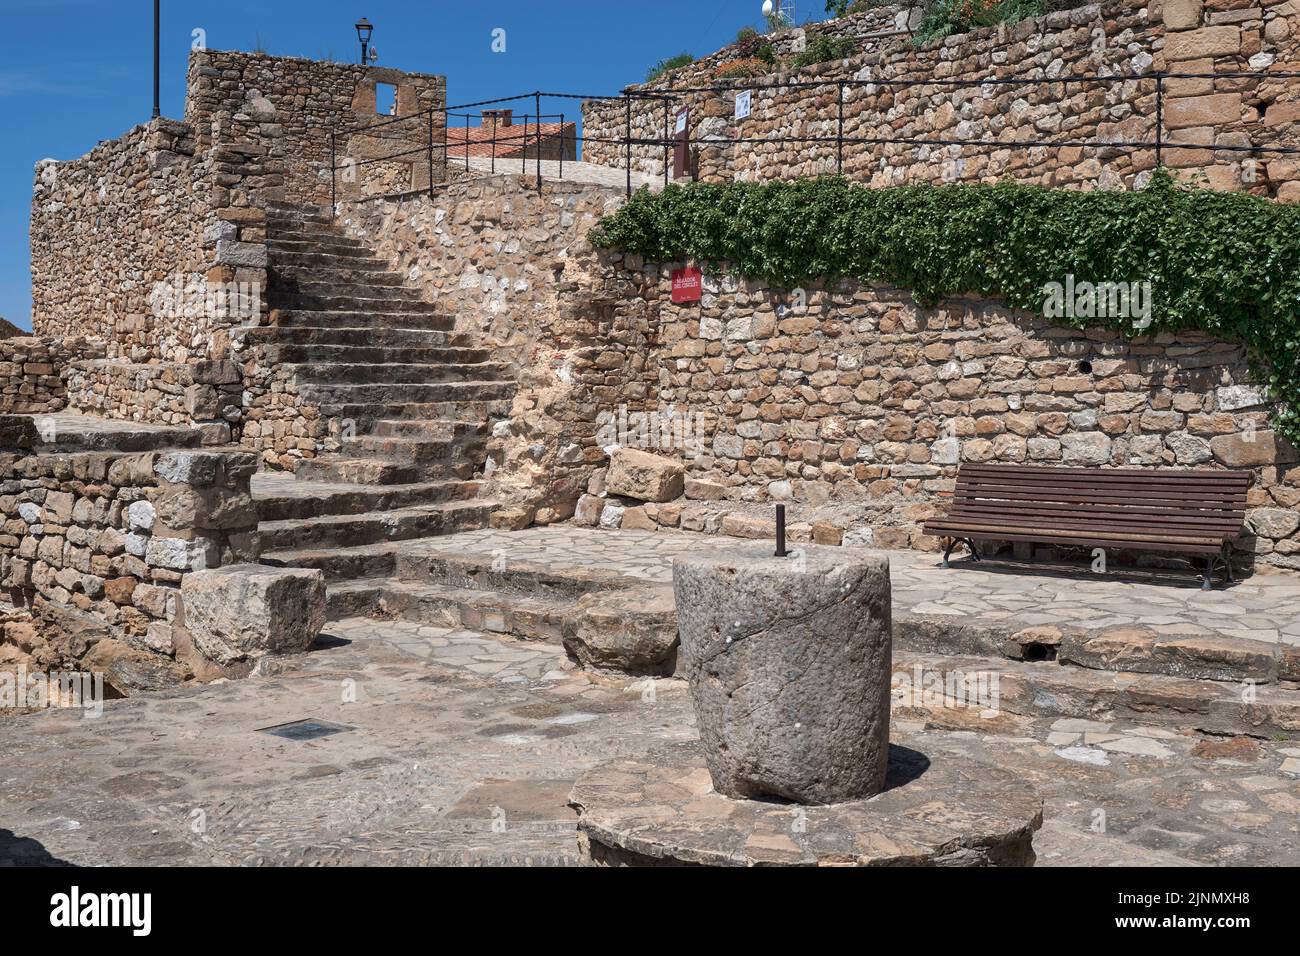 Mirador del Cinglet in the town of Culla, declared the most beautiful in Spain, Castellon, Spain, Europe Stock Photo